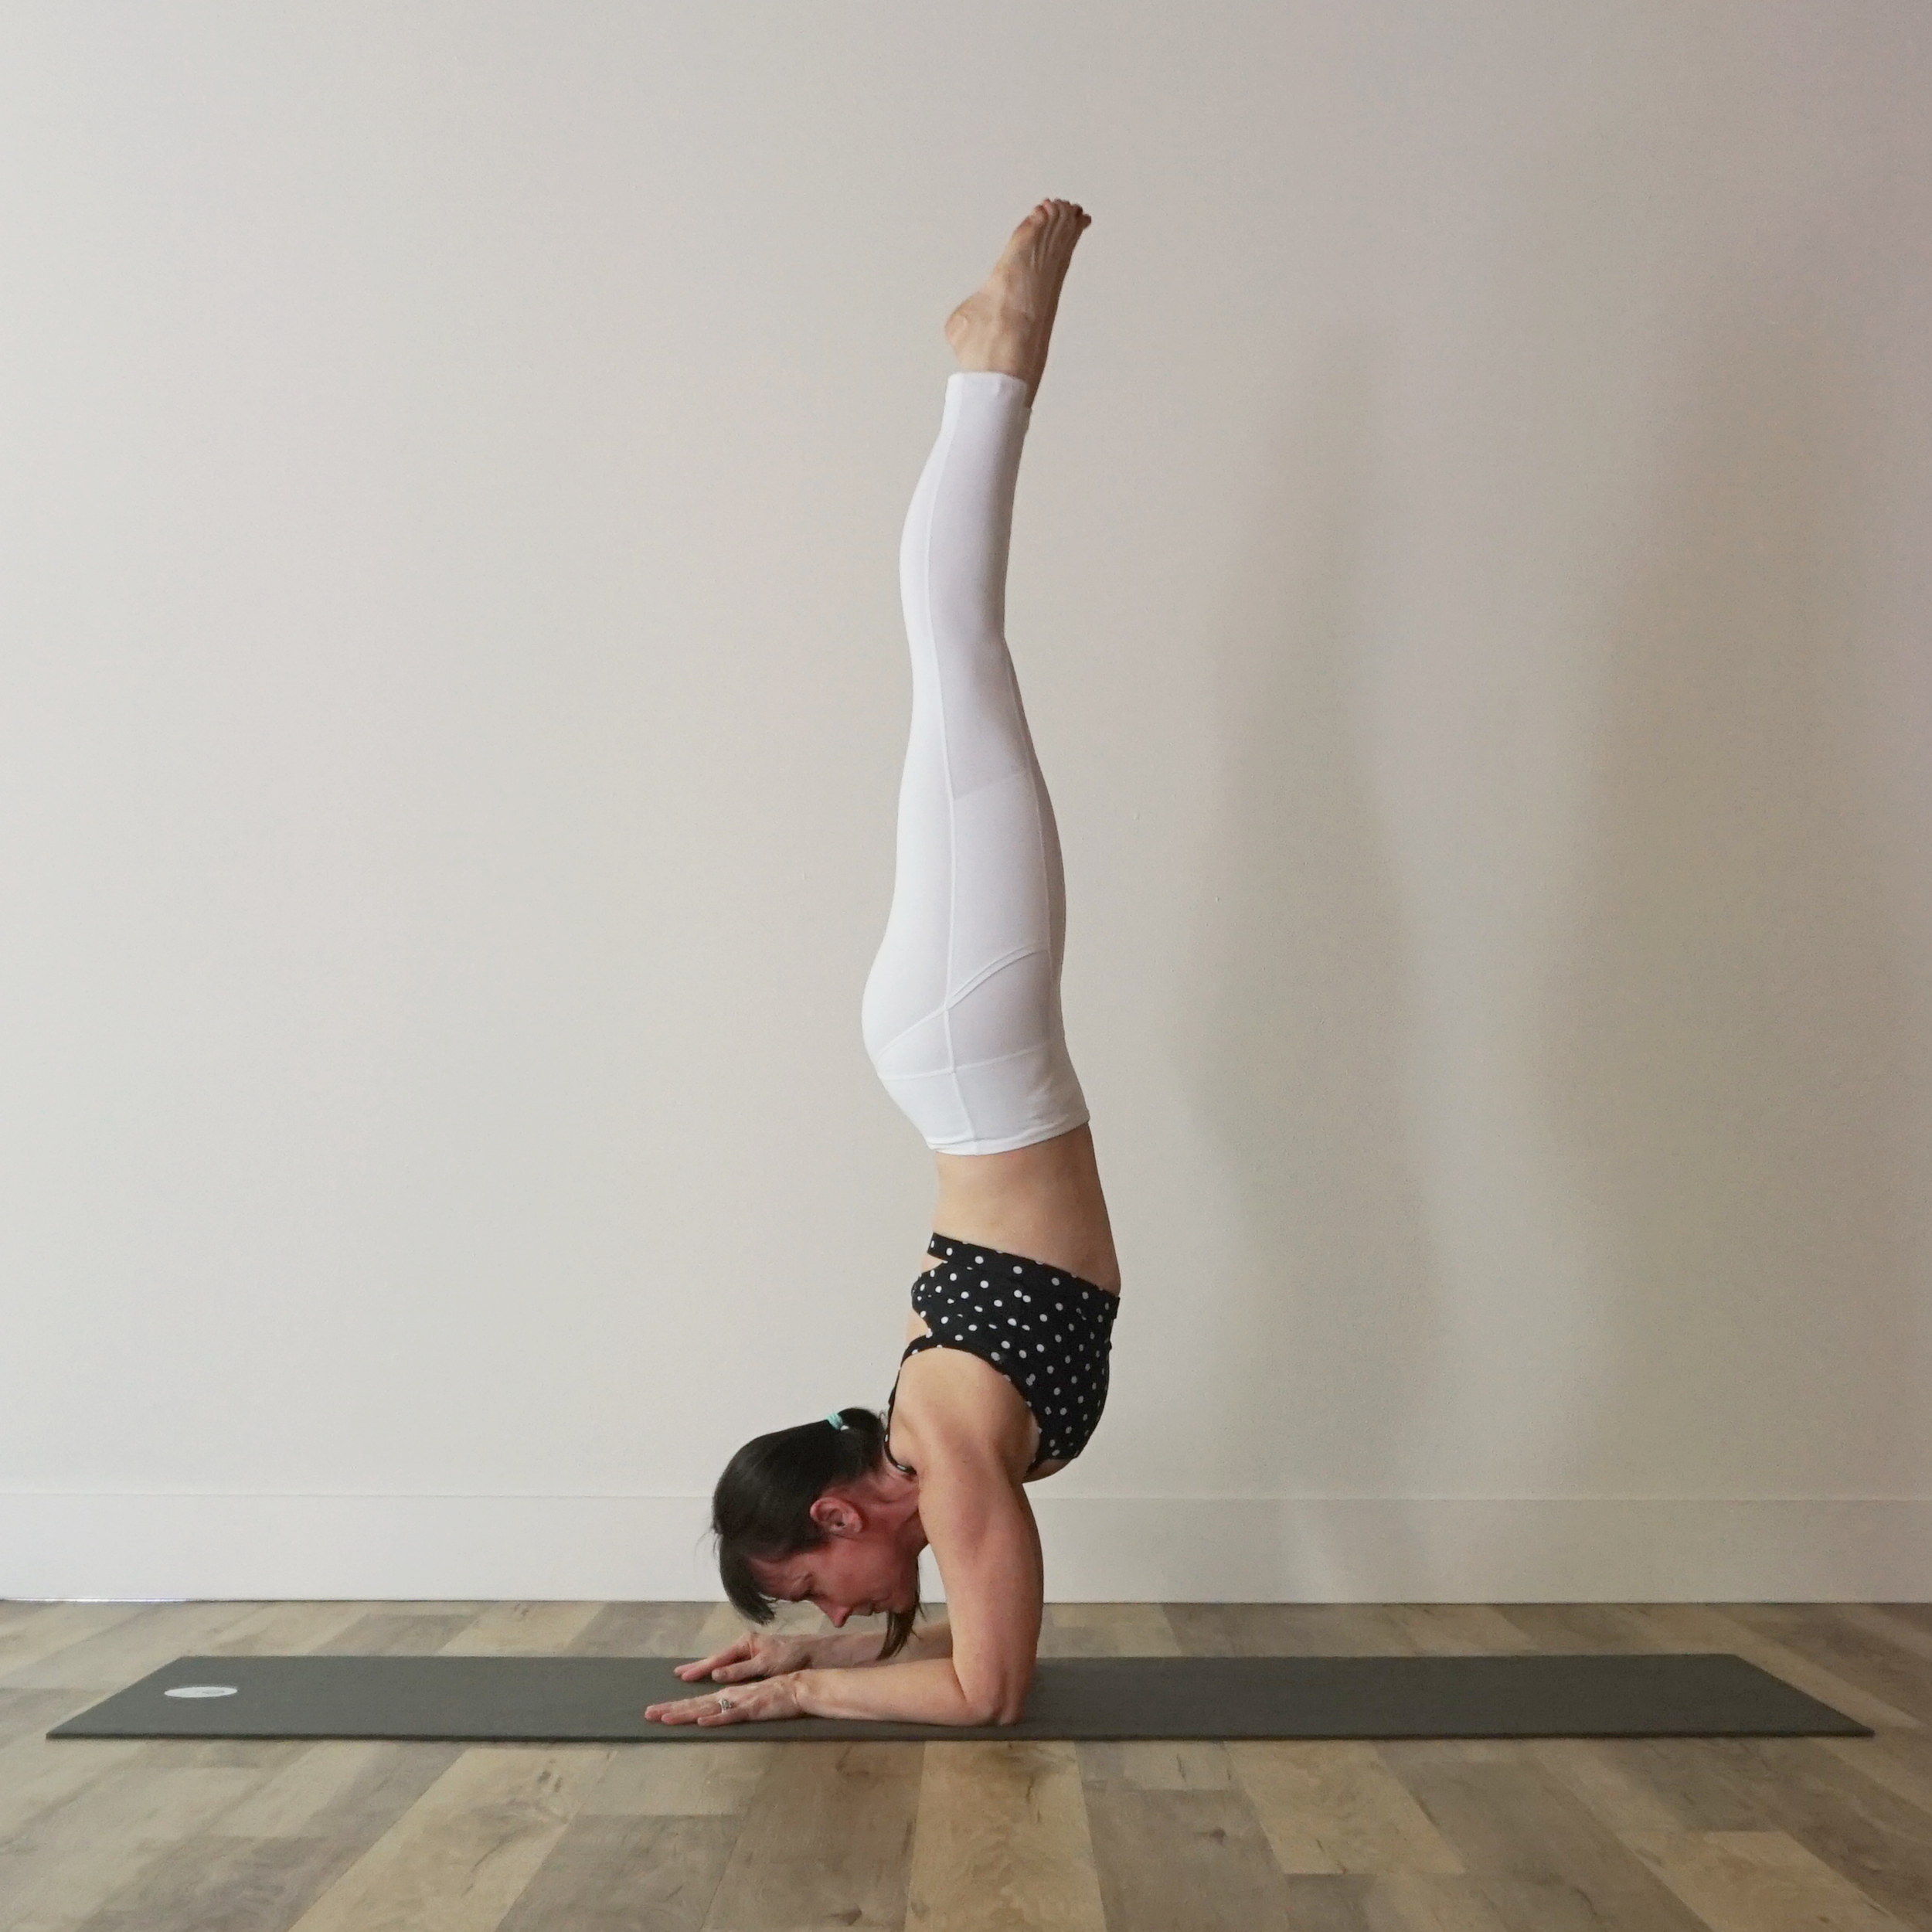 Yoga For Hip Flexors: 15 Yoga Poses to Release Your Psoas - YOGA PRACTICE